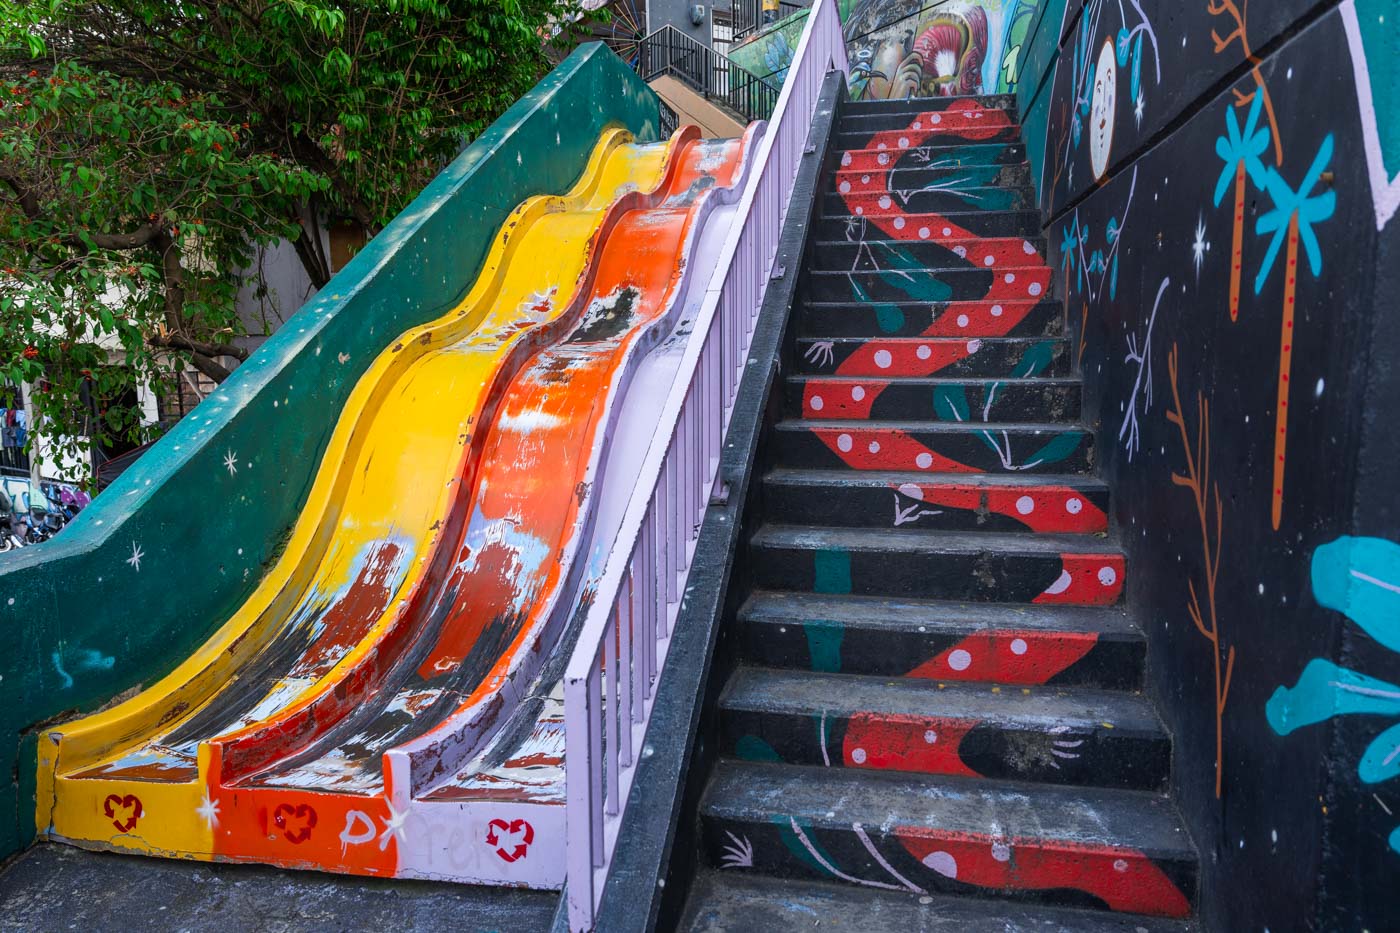 A colourful slide built as a memorial for the death of a local boy.